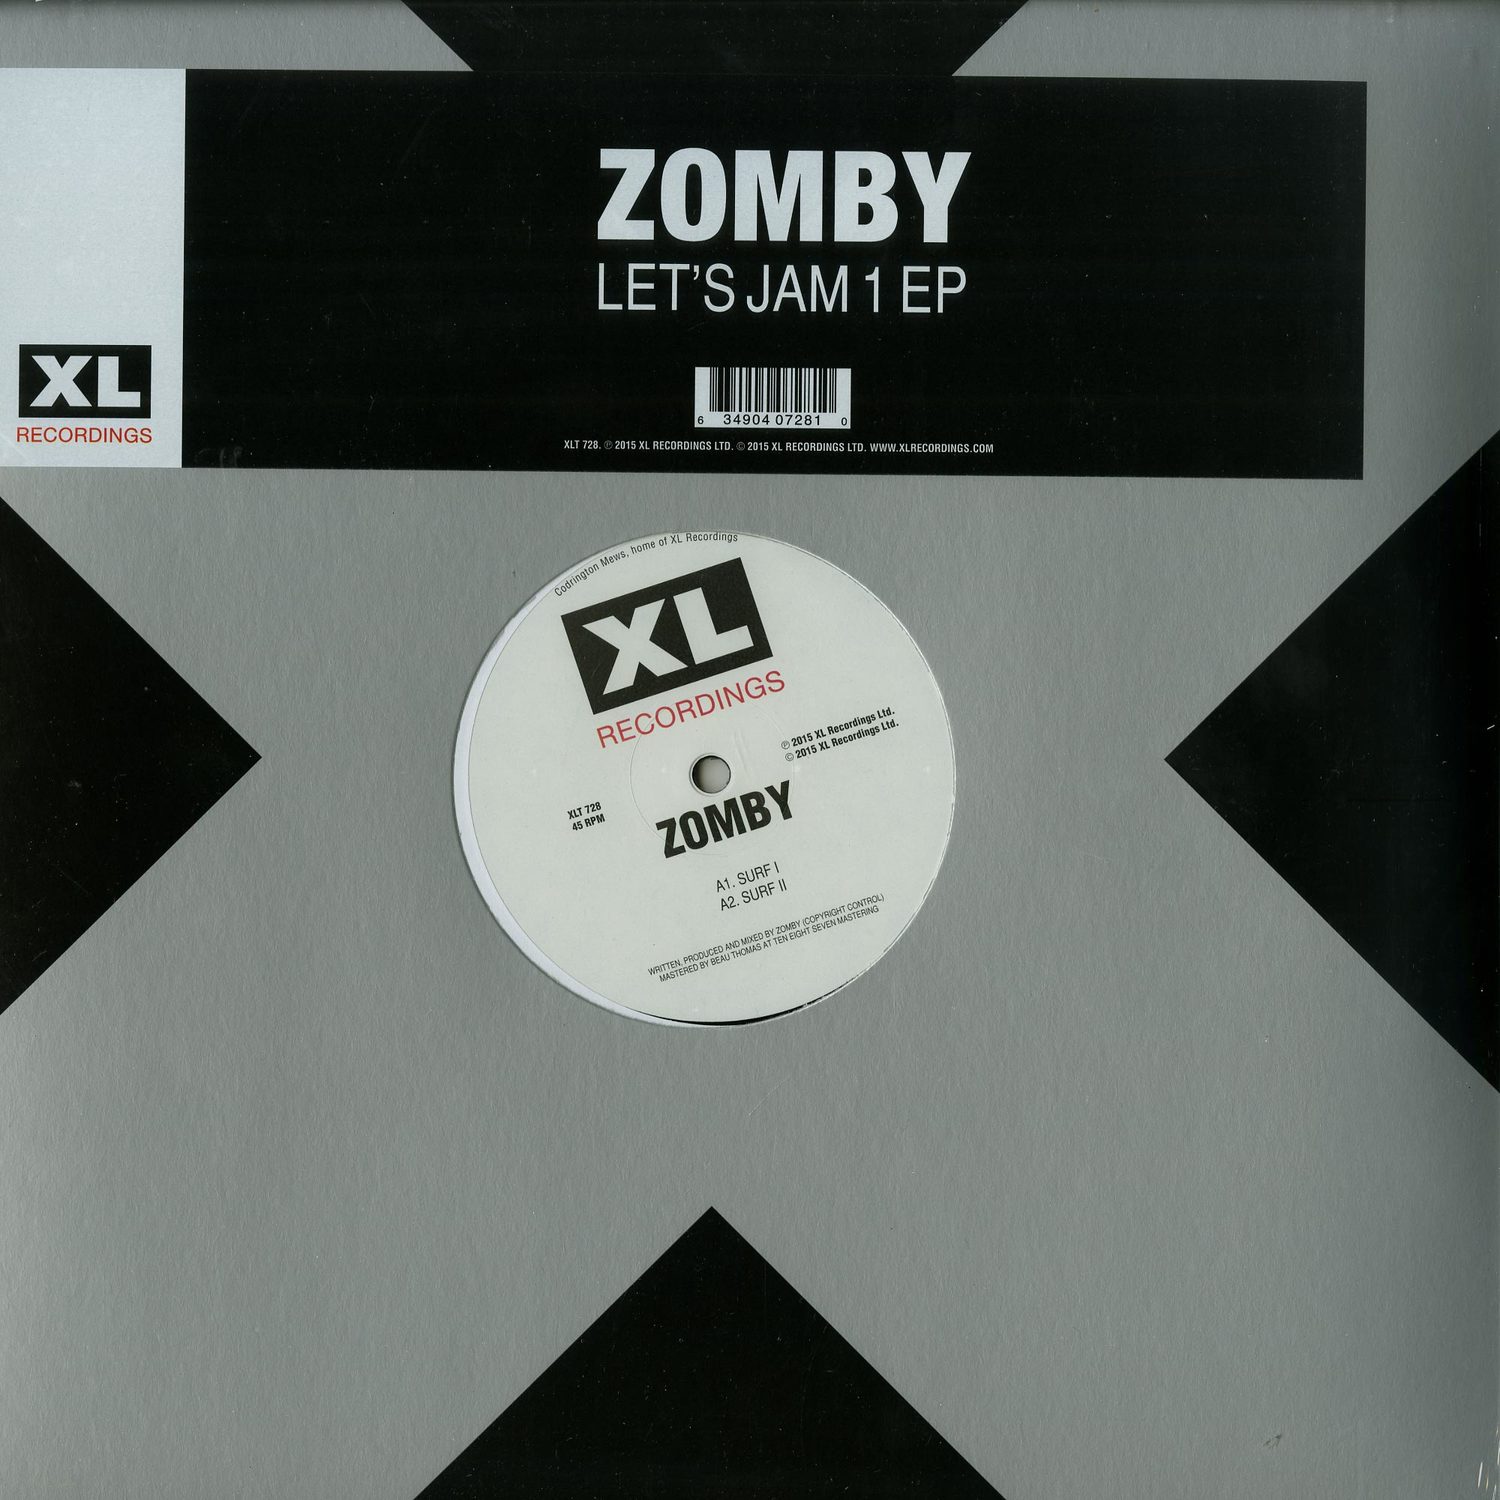 Zomby - LETS JAM 1 EP